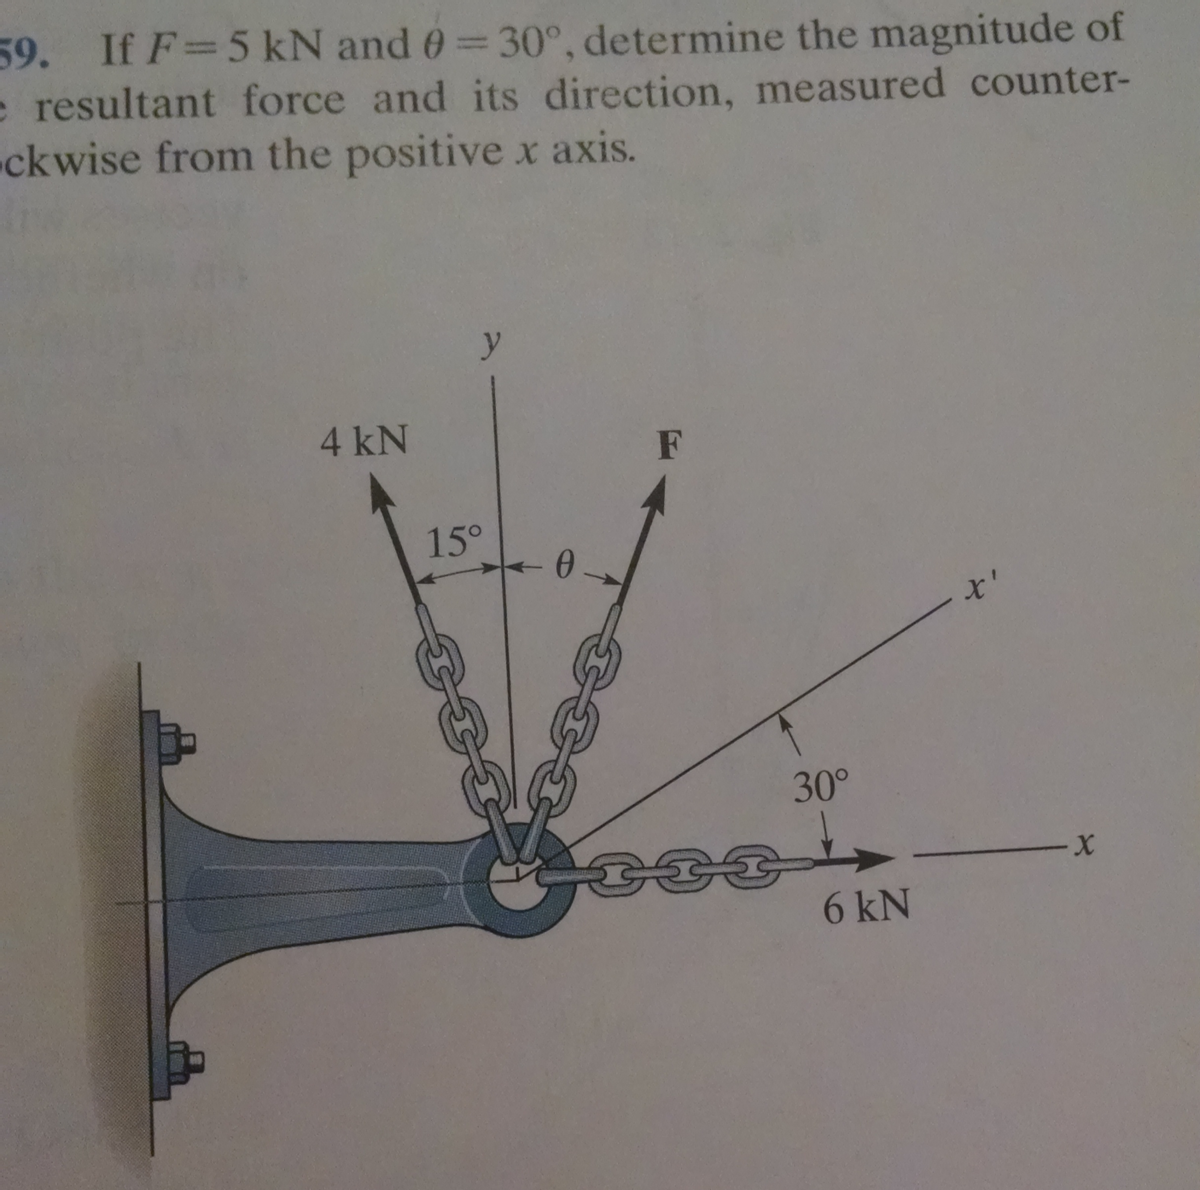 59. If F=5 kN and 0 = 30°, determine the magnitude of
e resultant force and its direction, measured counter-
ckwise from the positive x axis.
4 kN
y
15°
0
F
30°
6 kN
X'
X